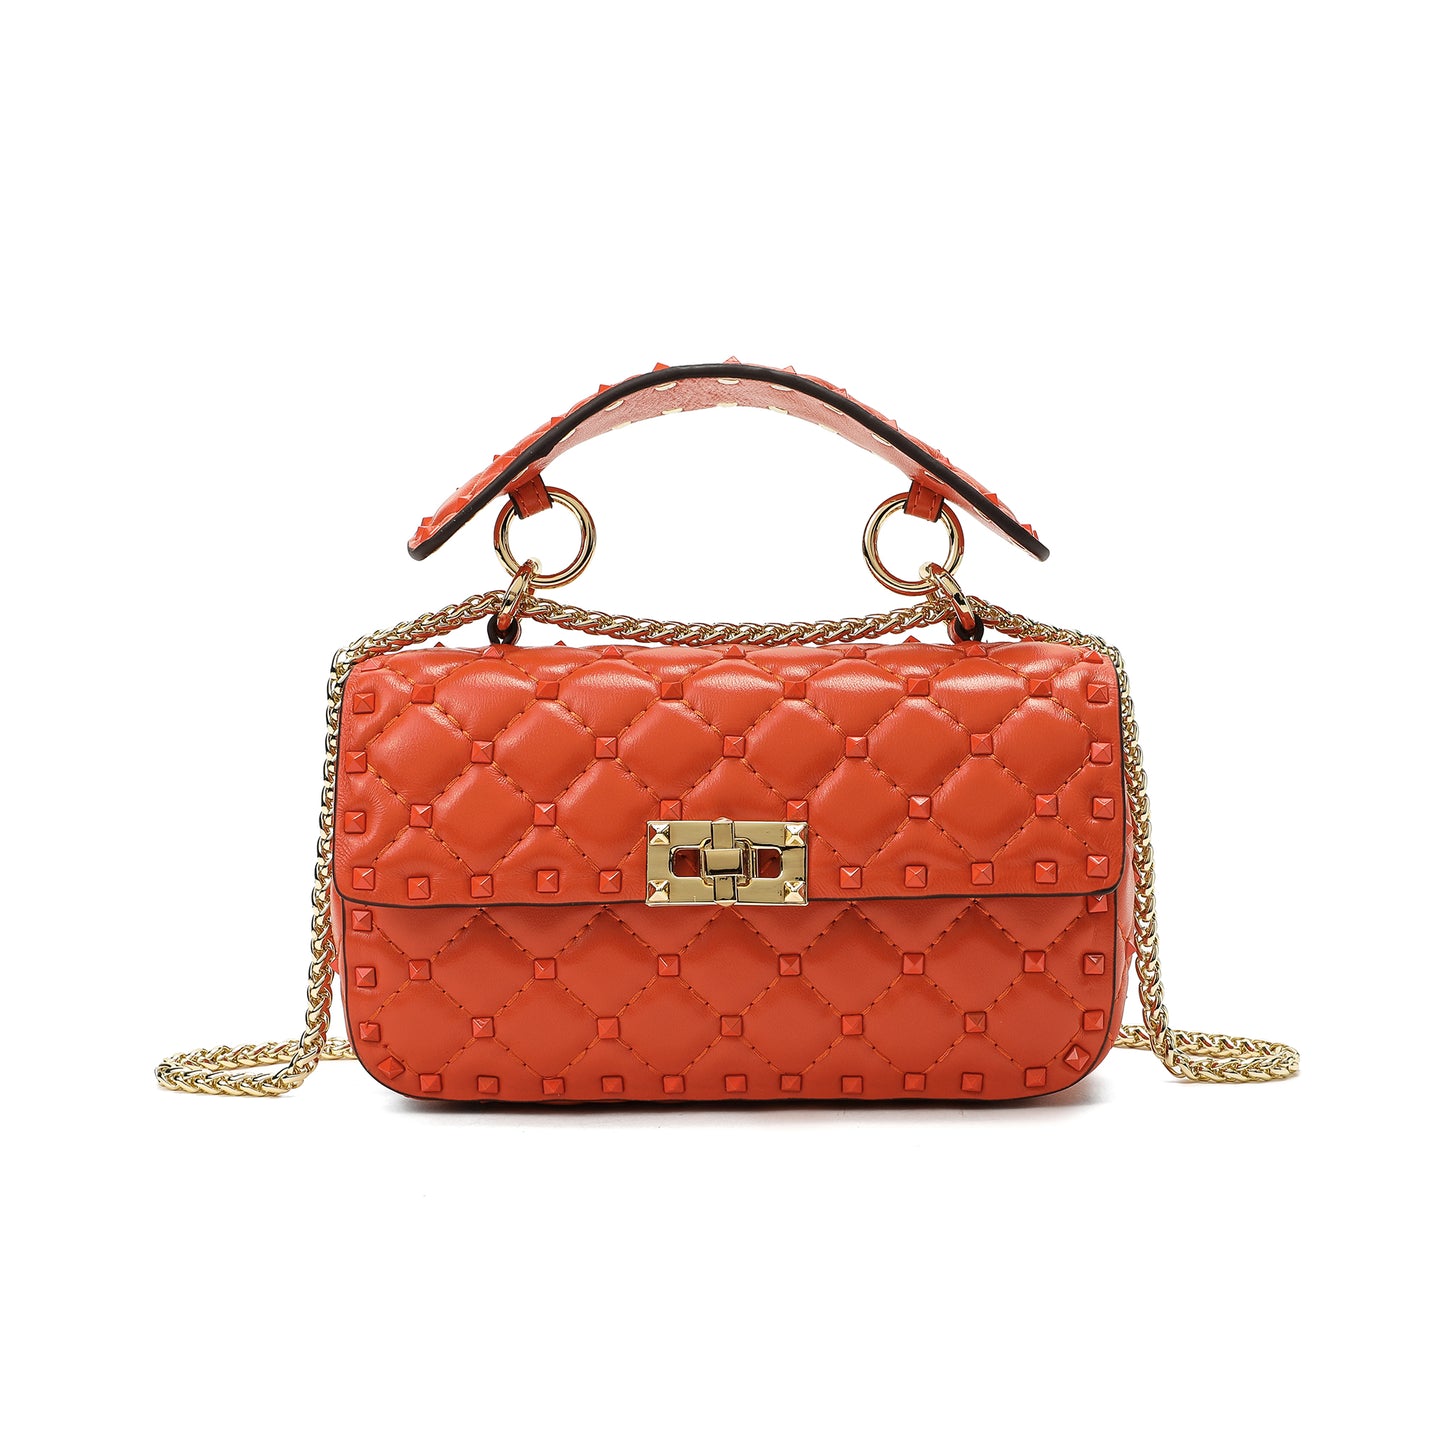 RED(V) Bags for Women - Shop on FARFETCH